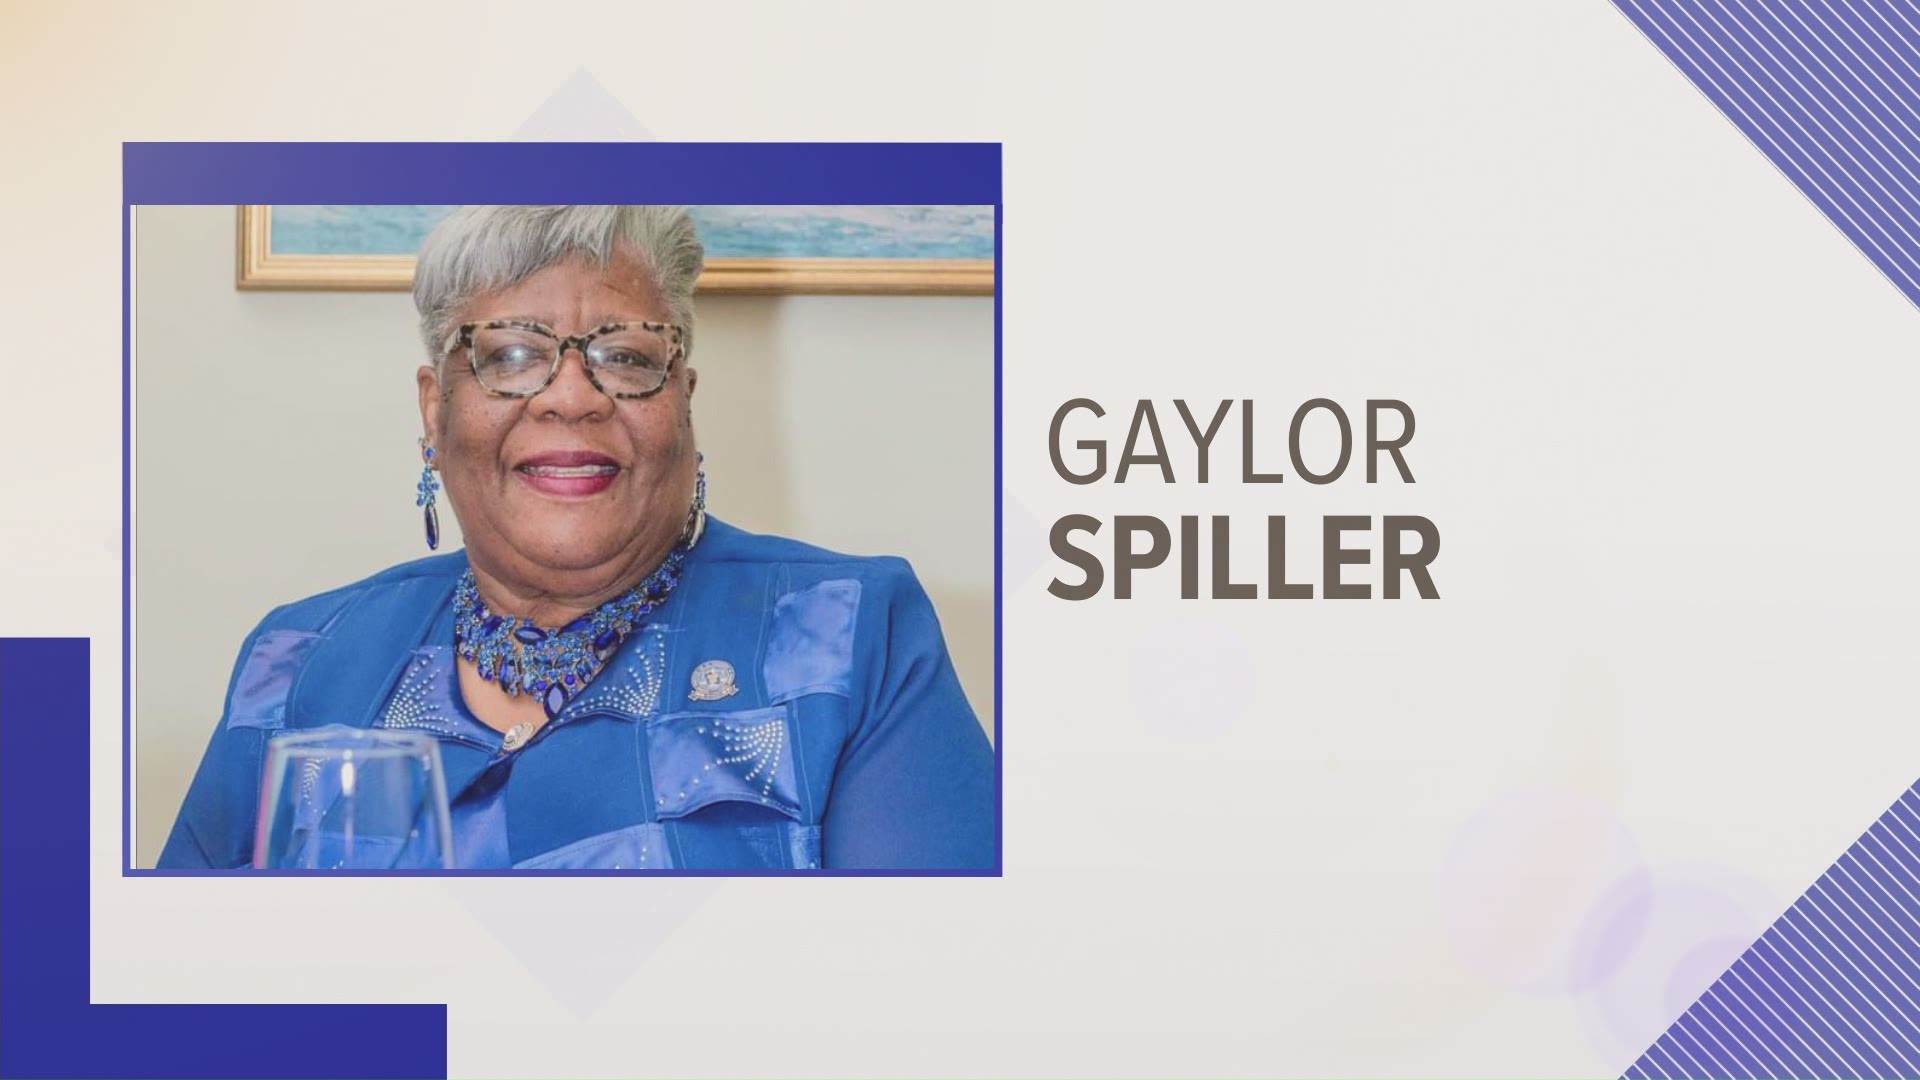 NAACP President Gaylor Spiller who served for the past 5 years, passed away January, 15 at West Jefferson Hospital.